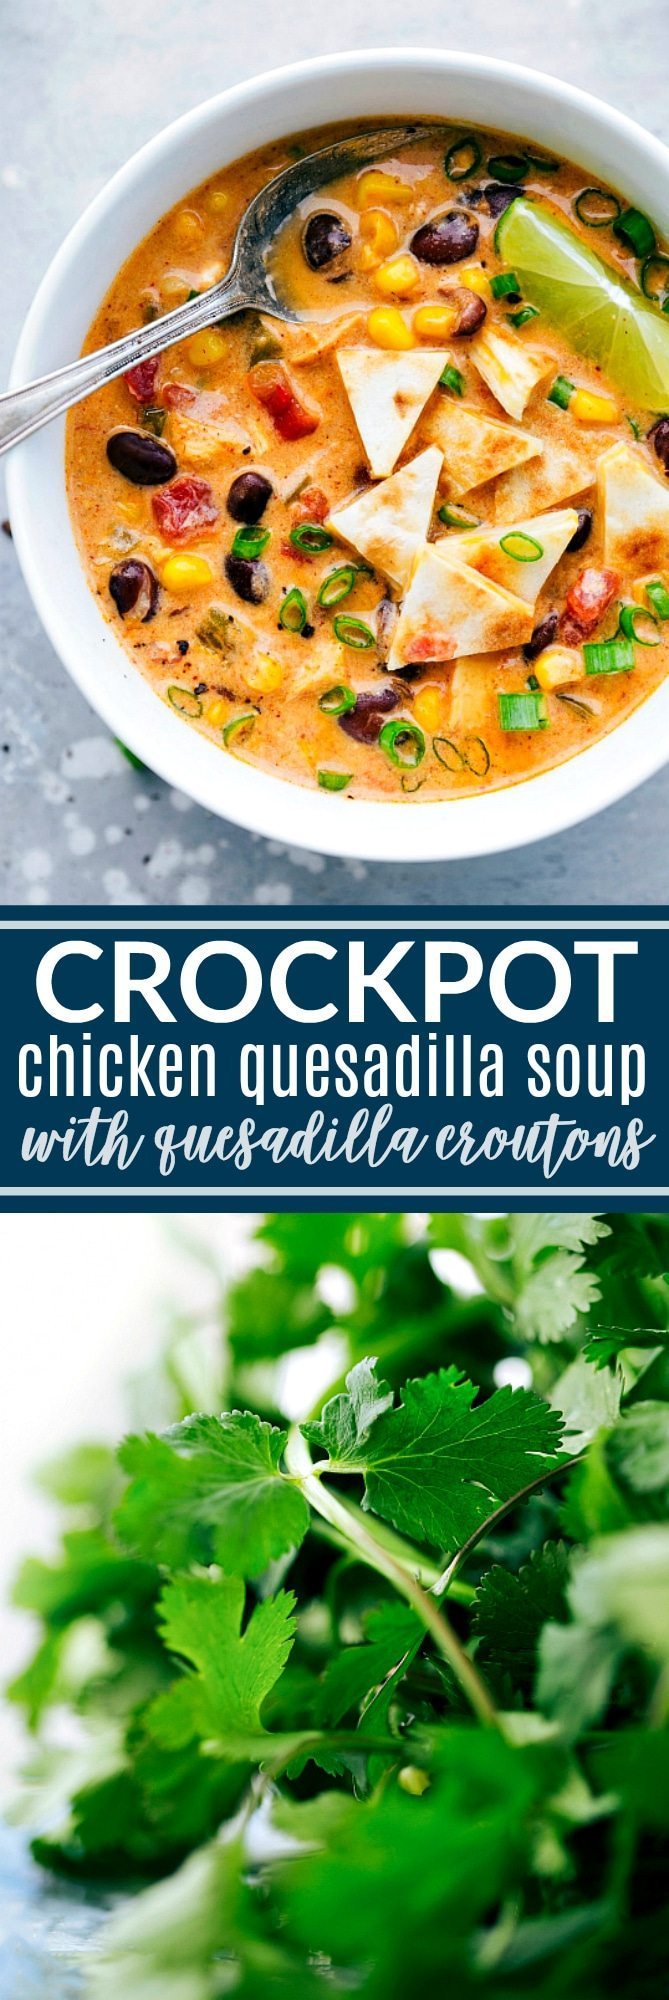 The BEST EVER Crockpot Creamy Chicken Quesadilla Soup! Dump it and forget about it and then serve with 2-ingredient quesadilla croutons! chelseasmessyapron.com